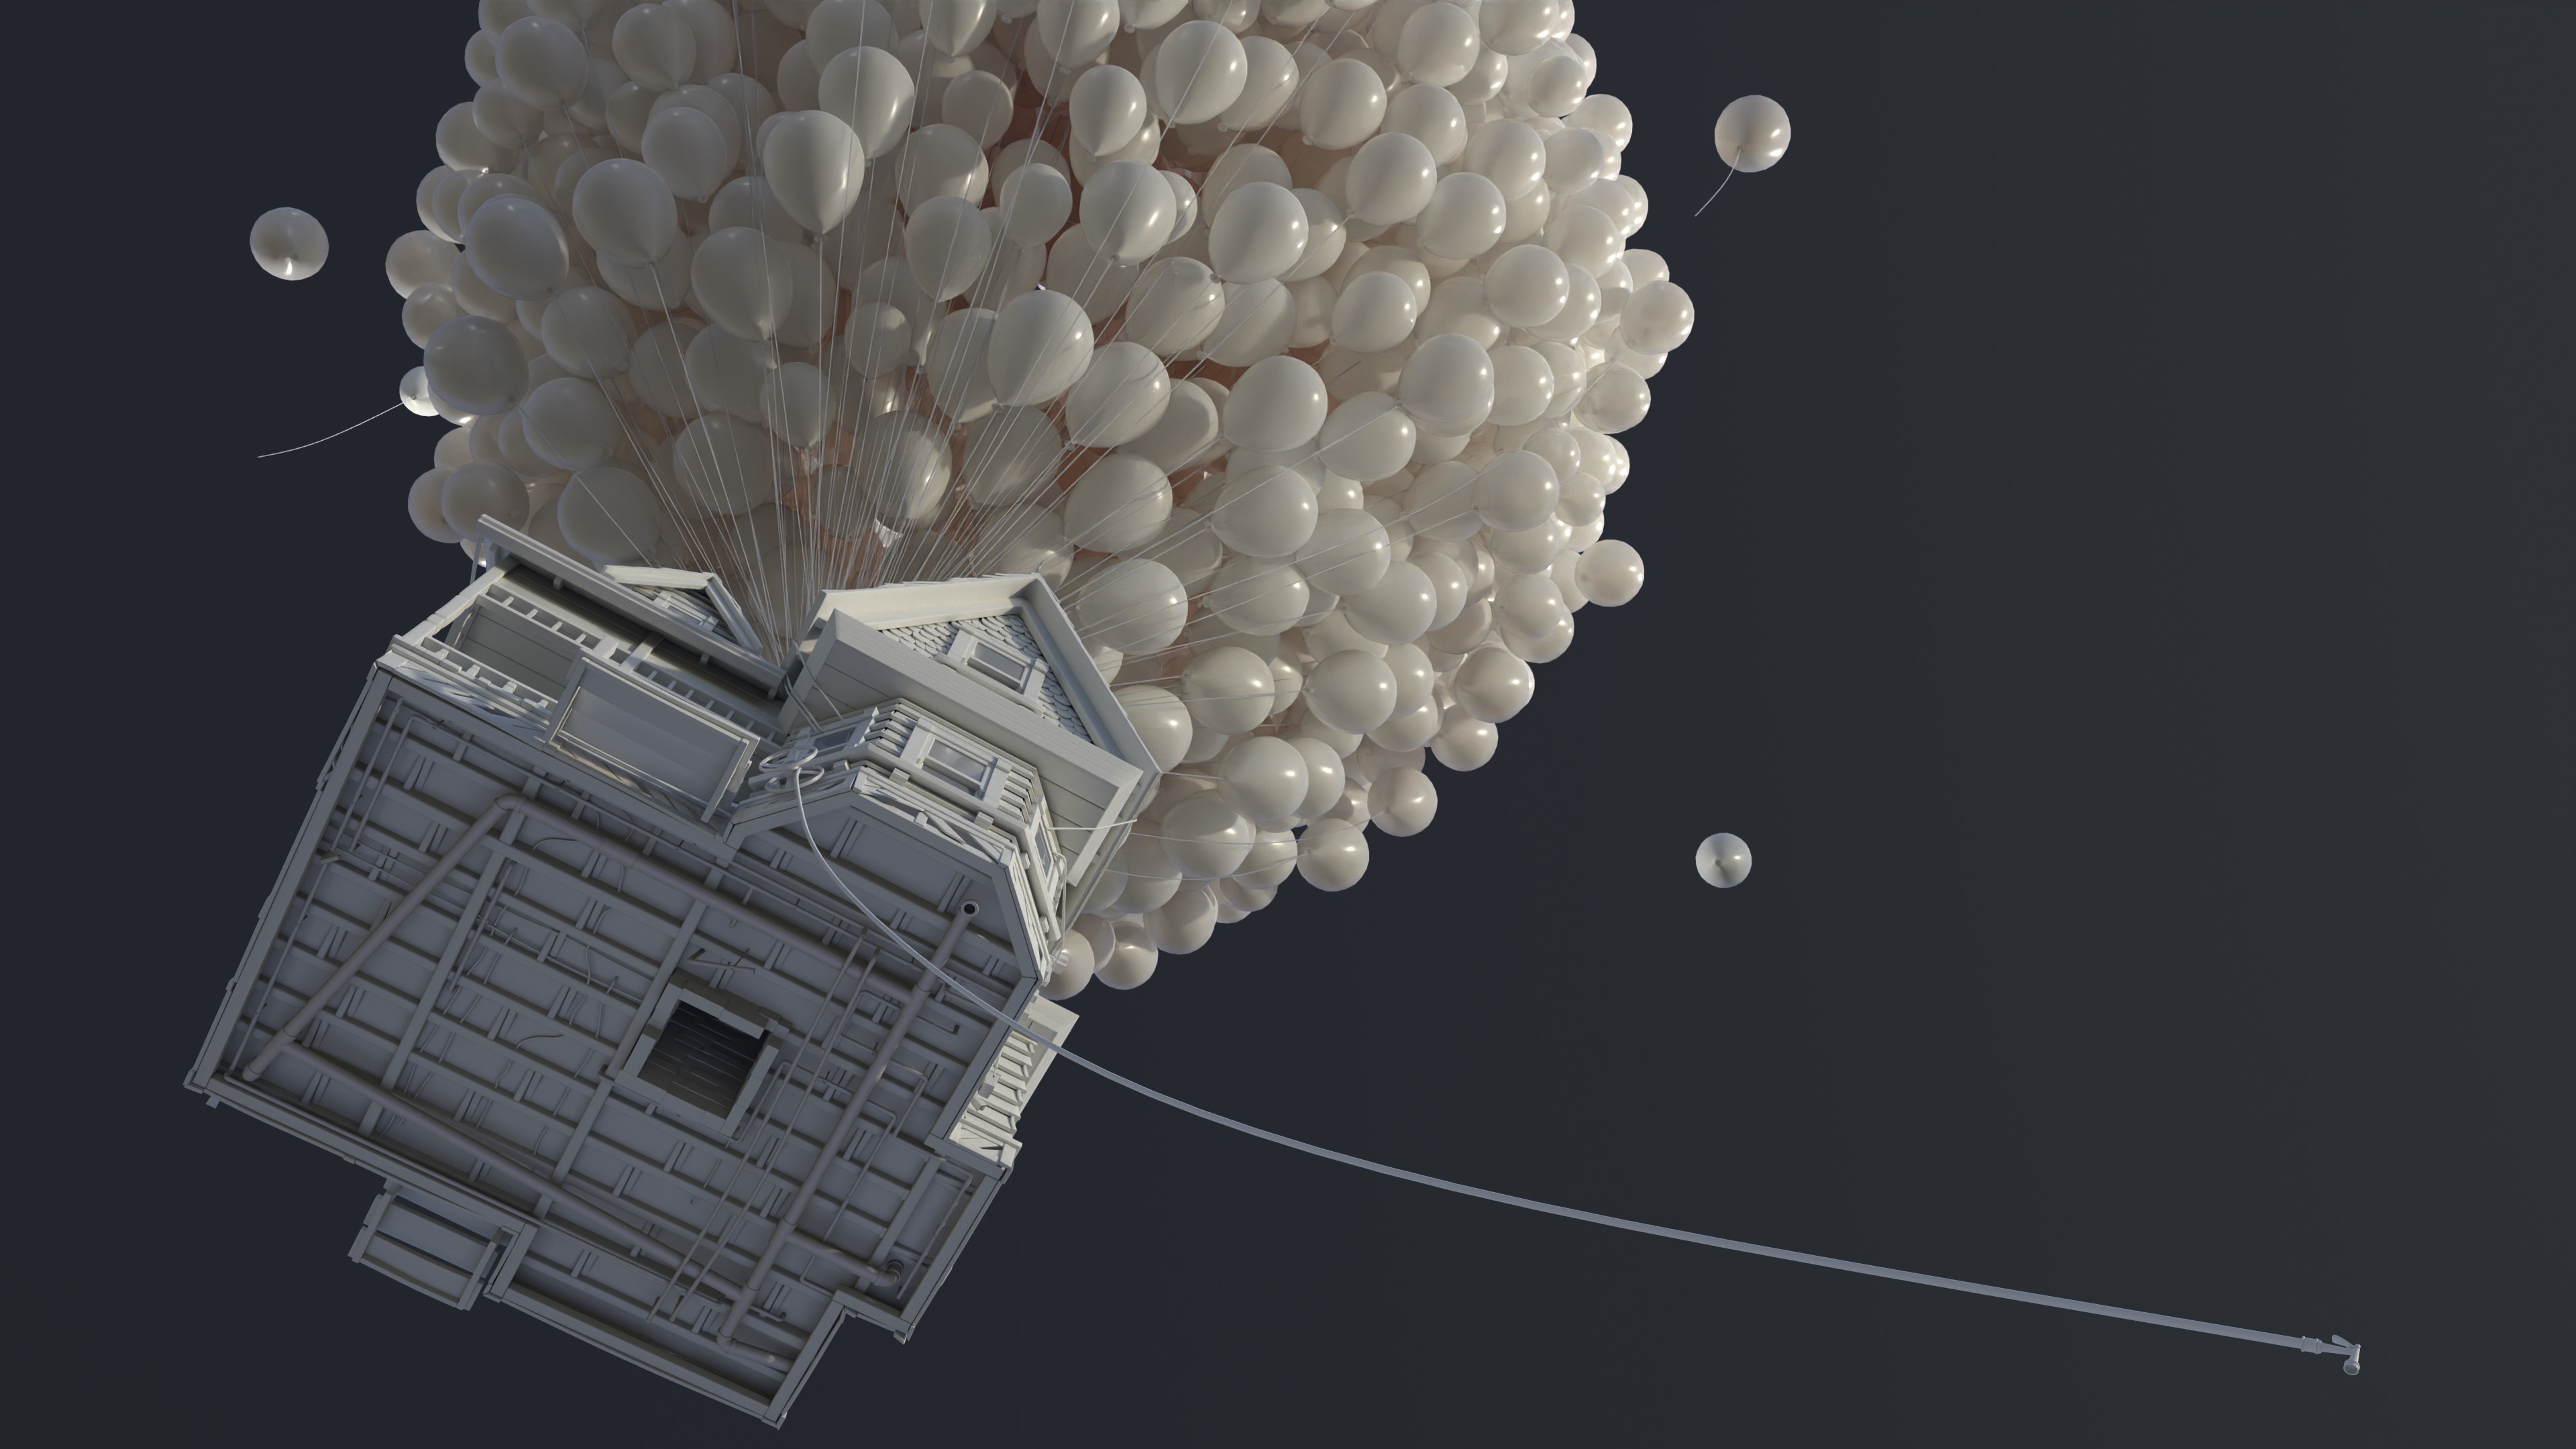 Cluster Ballooning: Monochrome flying house from Up animation movie, 3D model, Pixar Animation Studios. 3840x2160 4K Wallpaper.